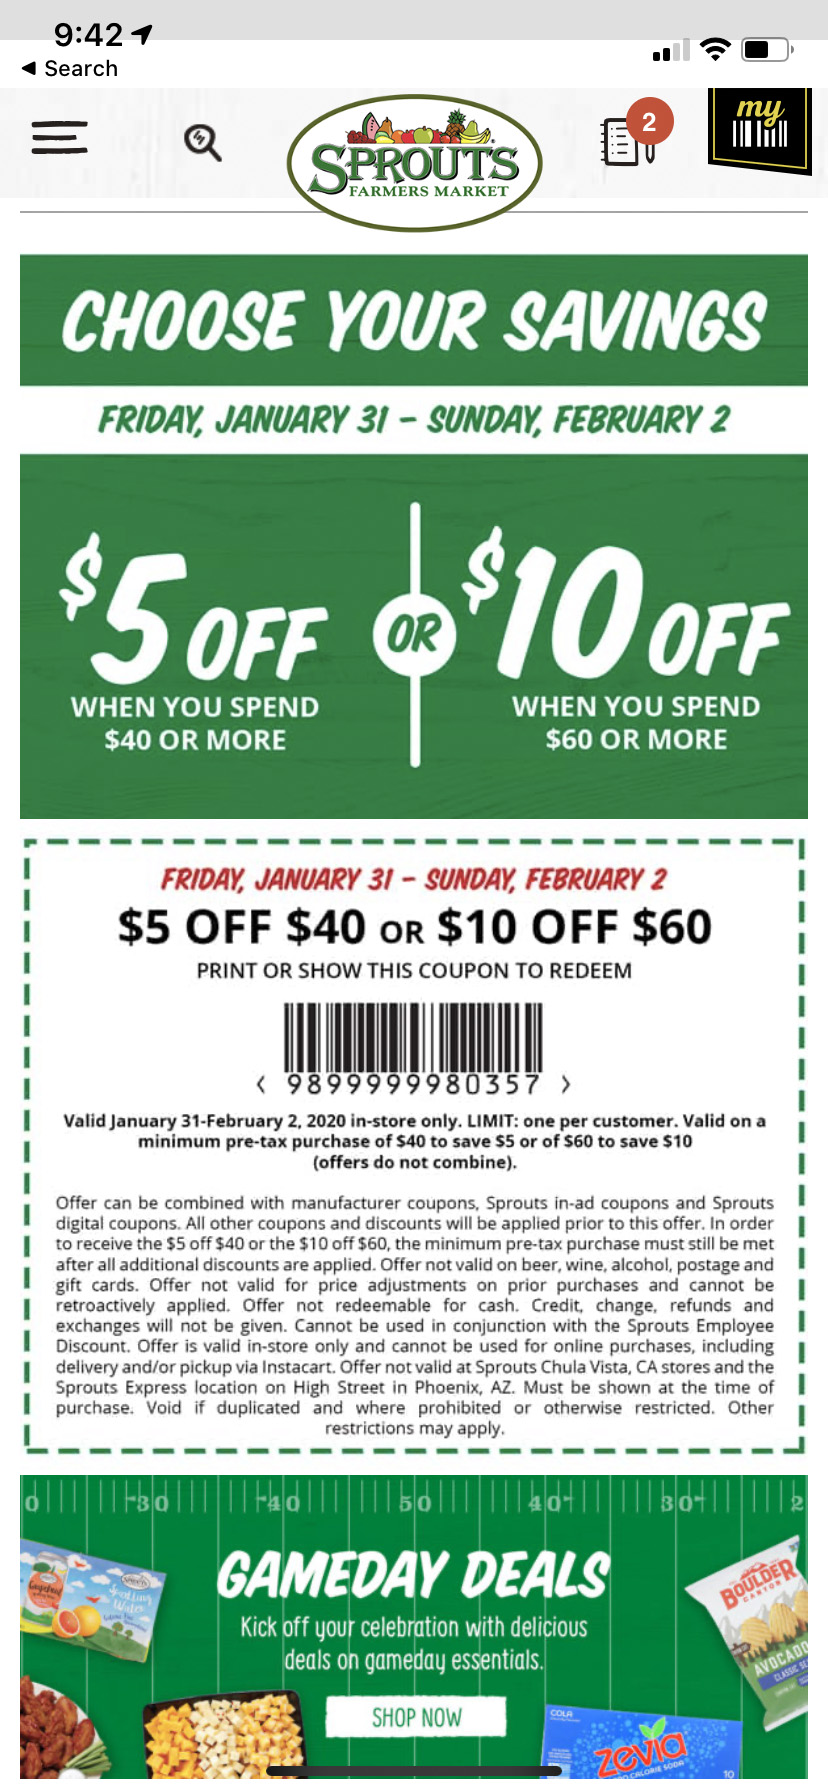 Sprouts Farmers Market 10 Off Coupon